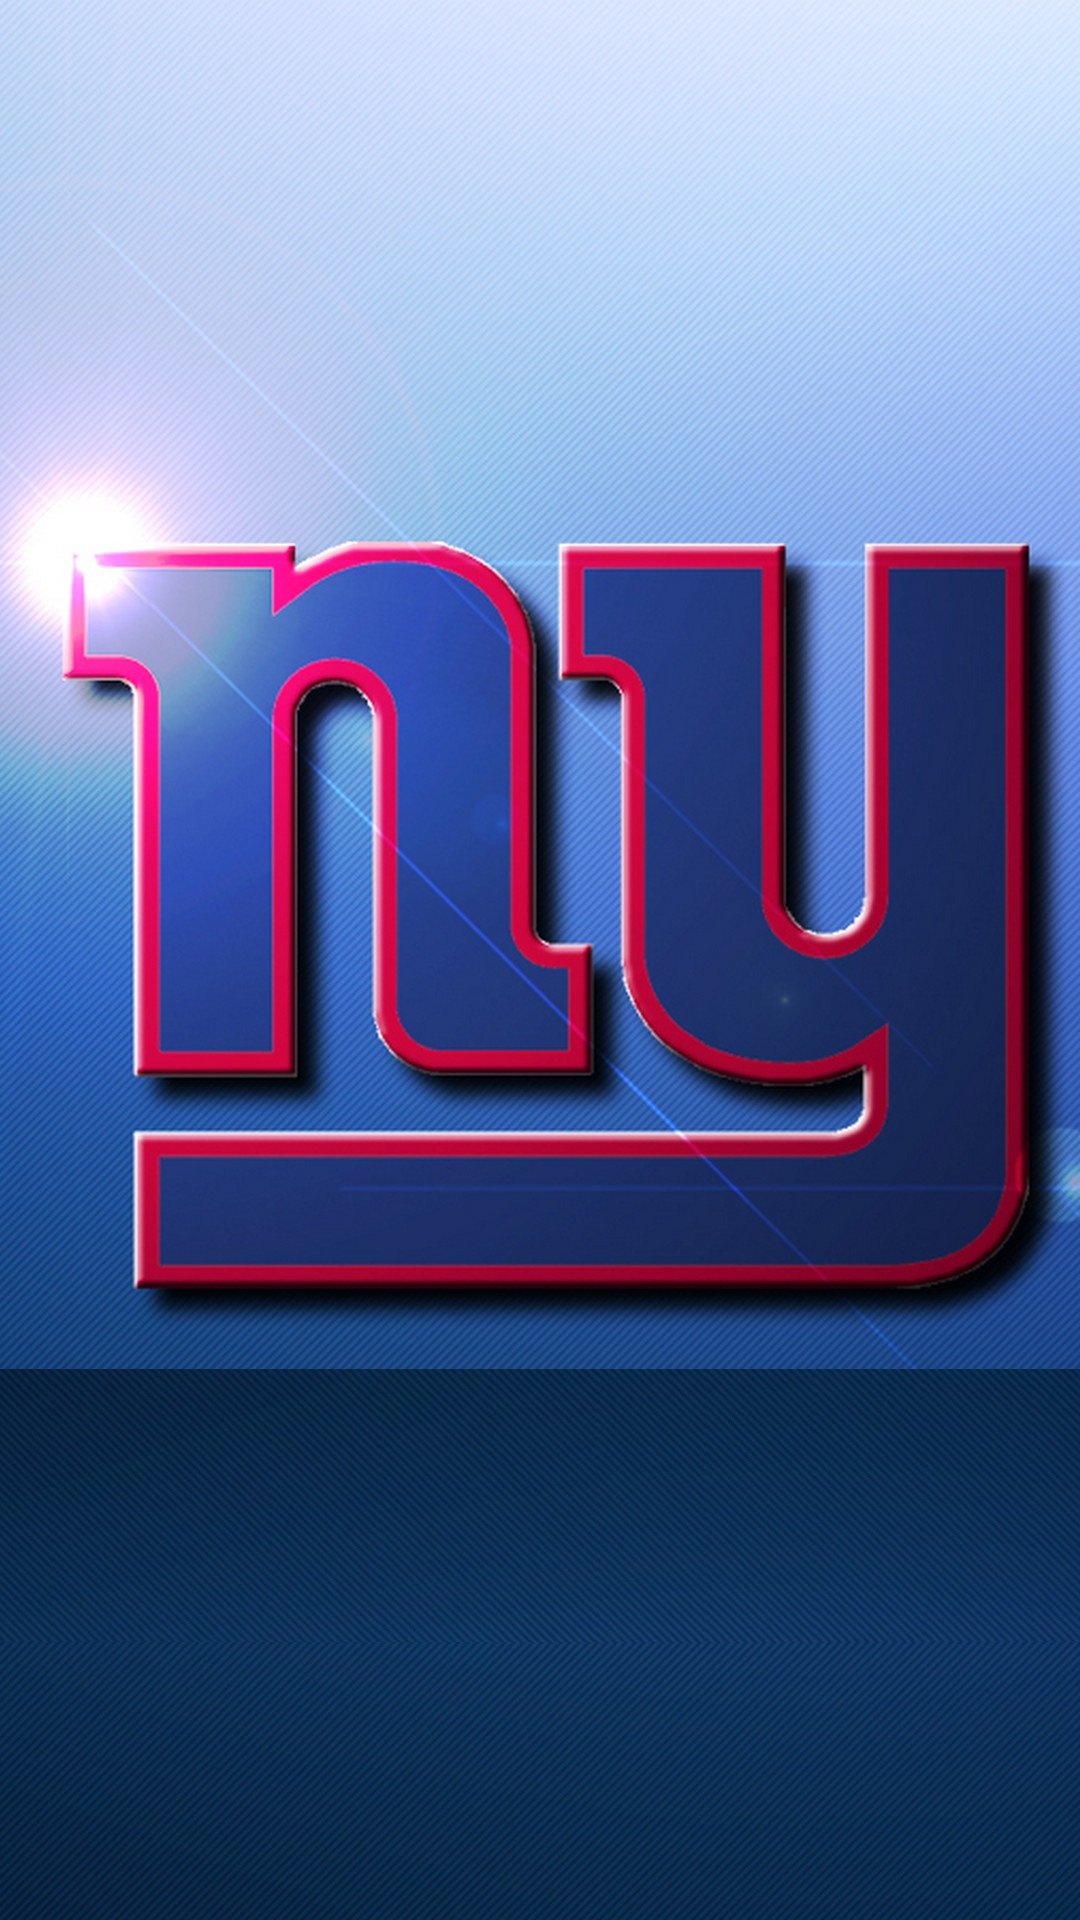 New York Giants iPhone Wallpaper in HD With high-resolution 1080X1920 pixel. Download and set as wallpaper for Desktop Computer, Apple iPhone X, XS Max, XR, 8, 7, 6, SE, iPad, Android